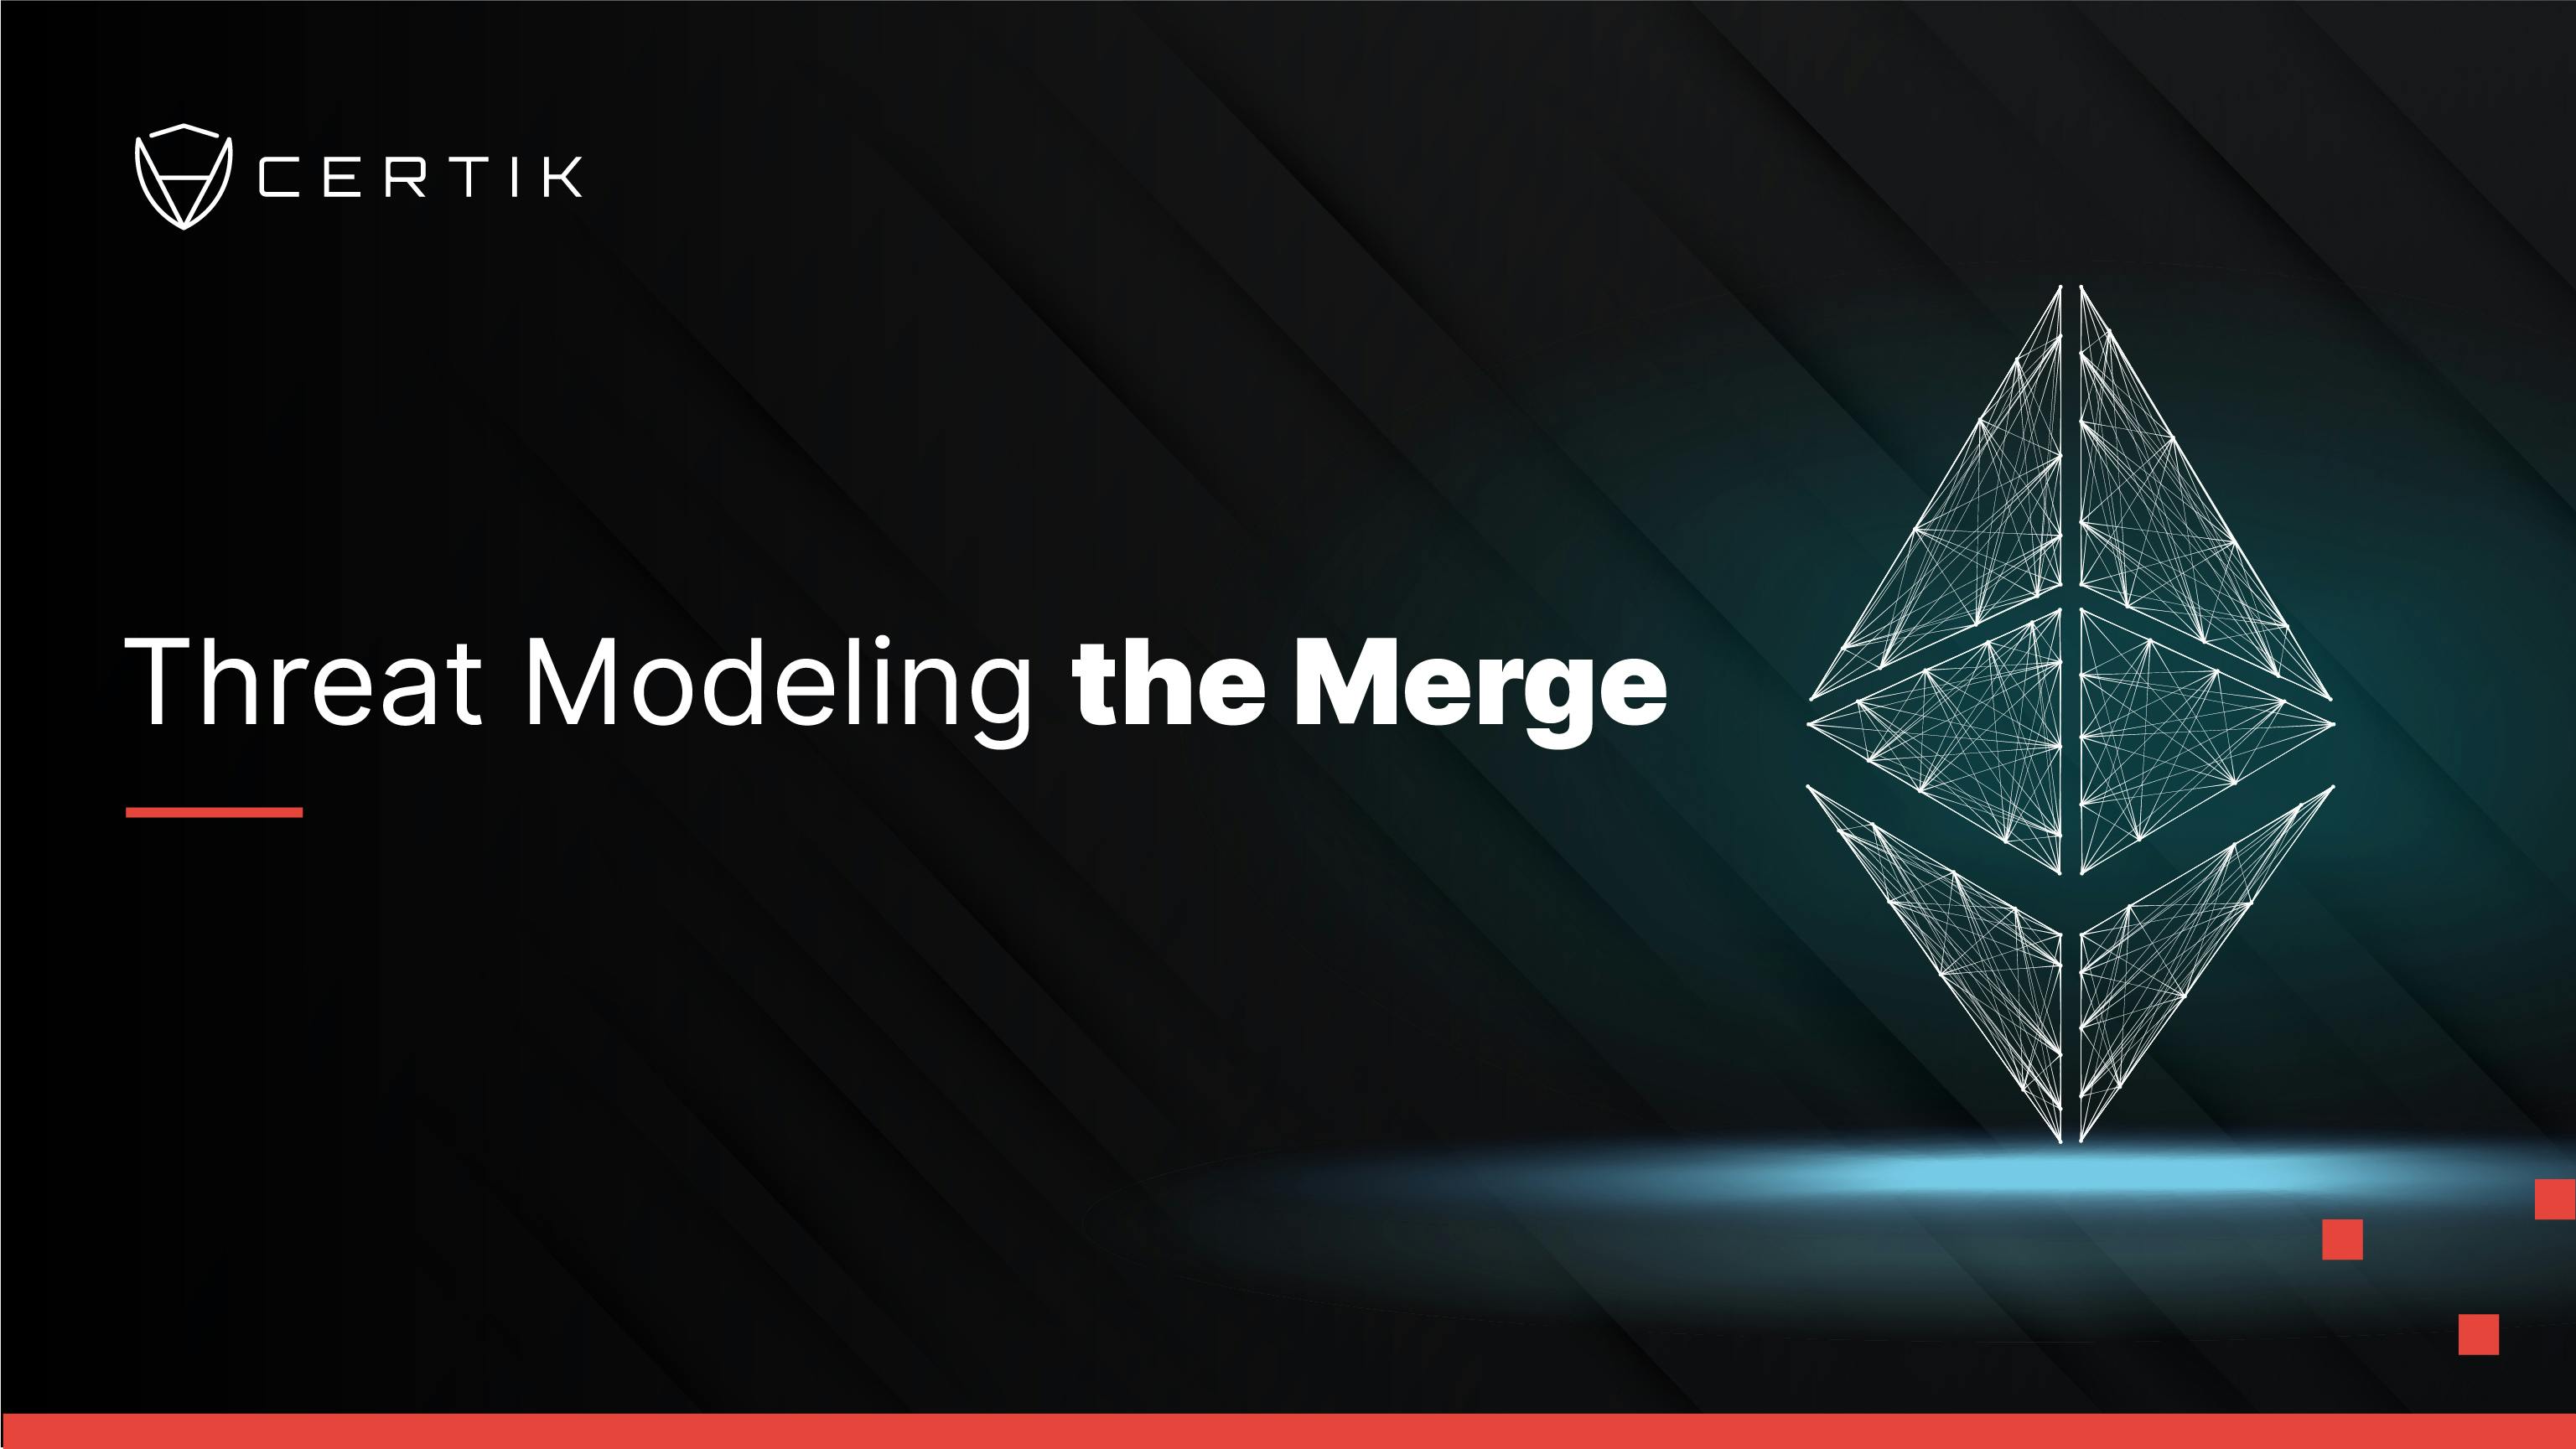 Threat Modeling the Merge - 3 Things That Could Go Wrong